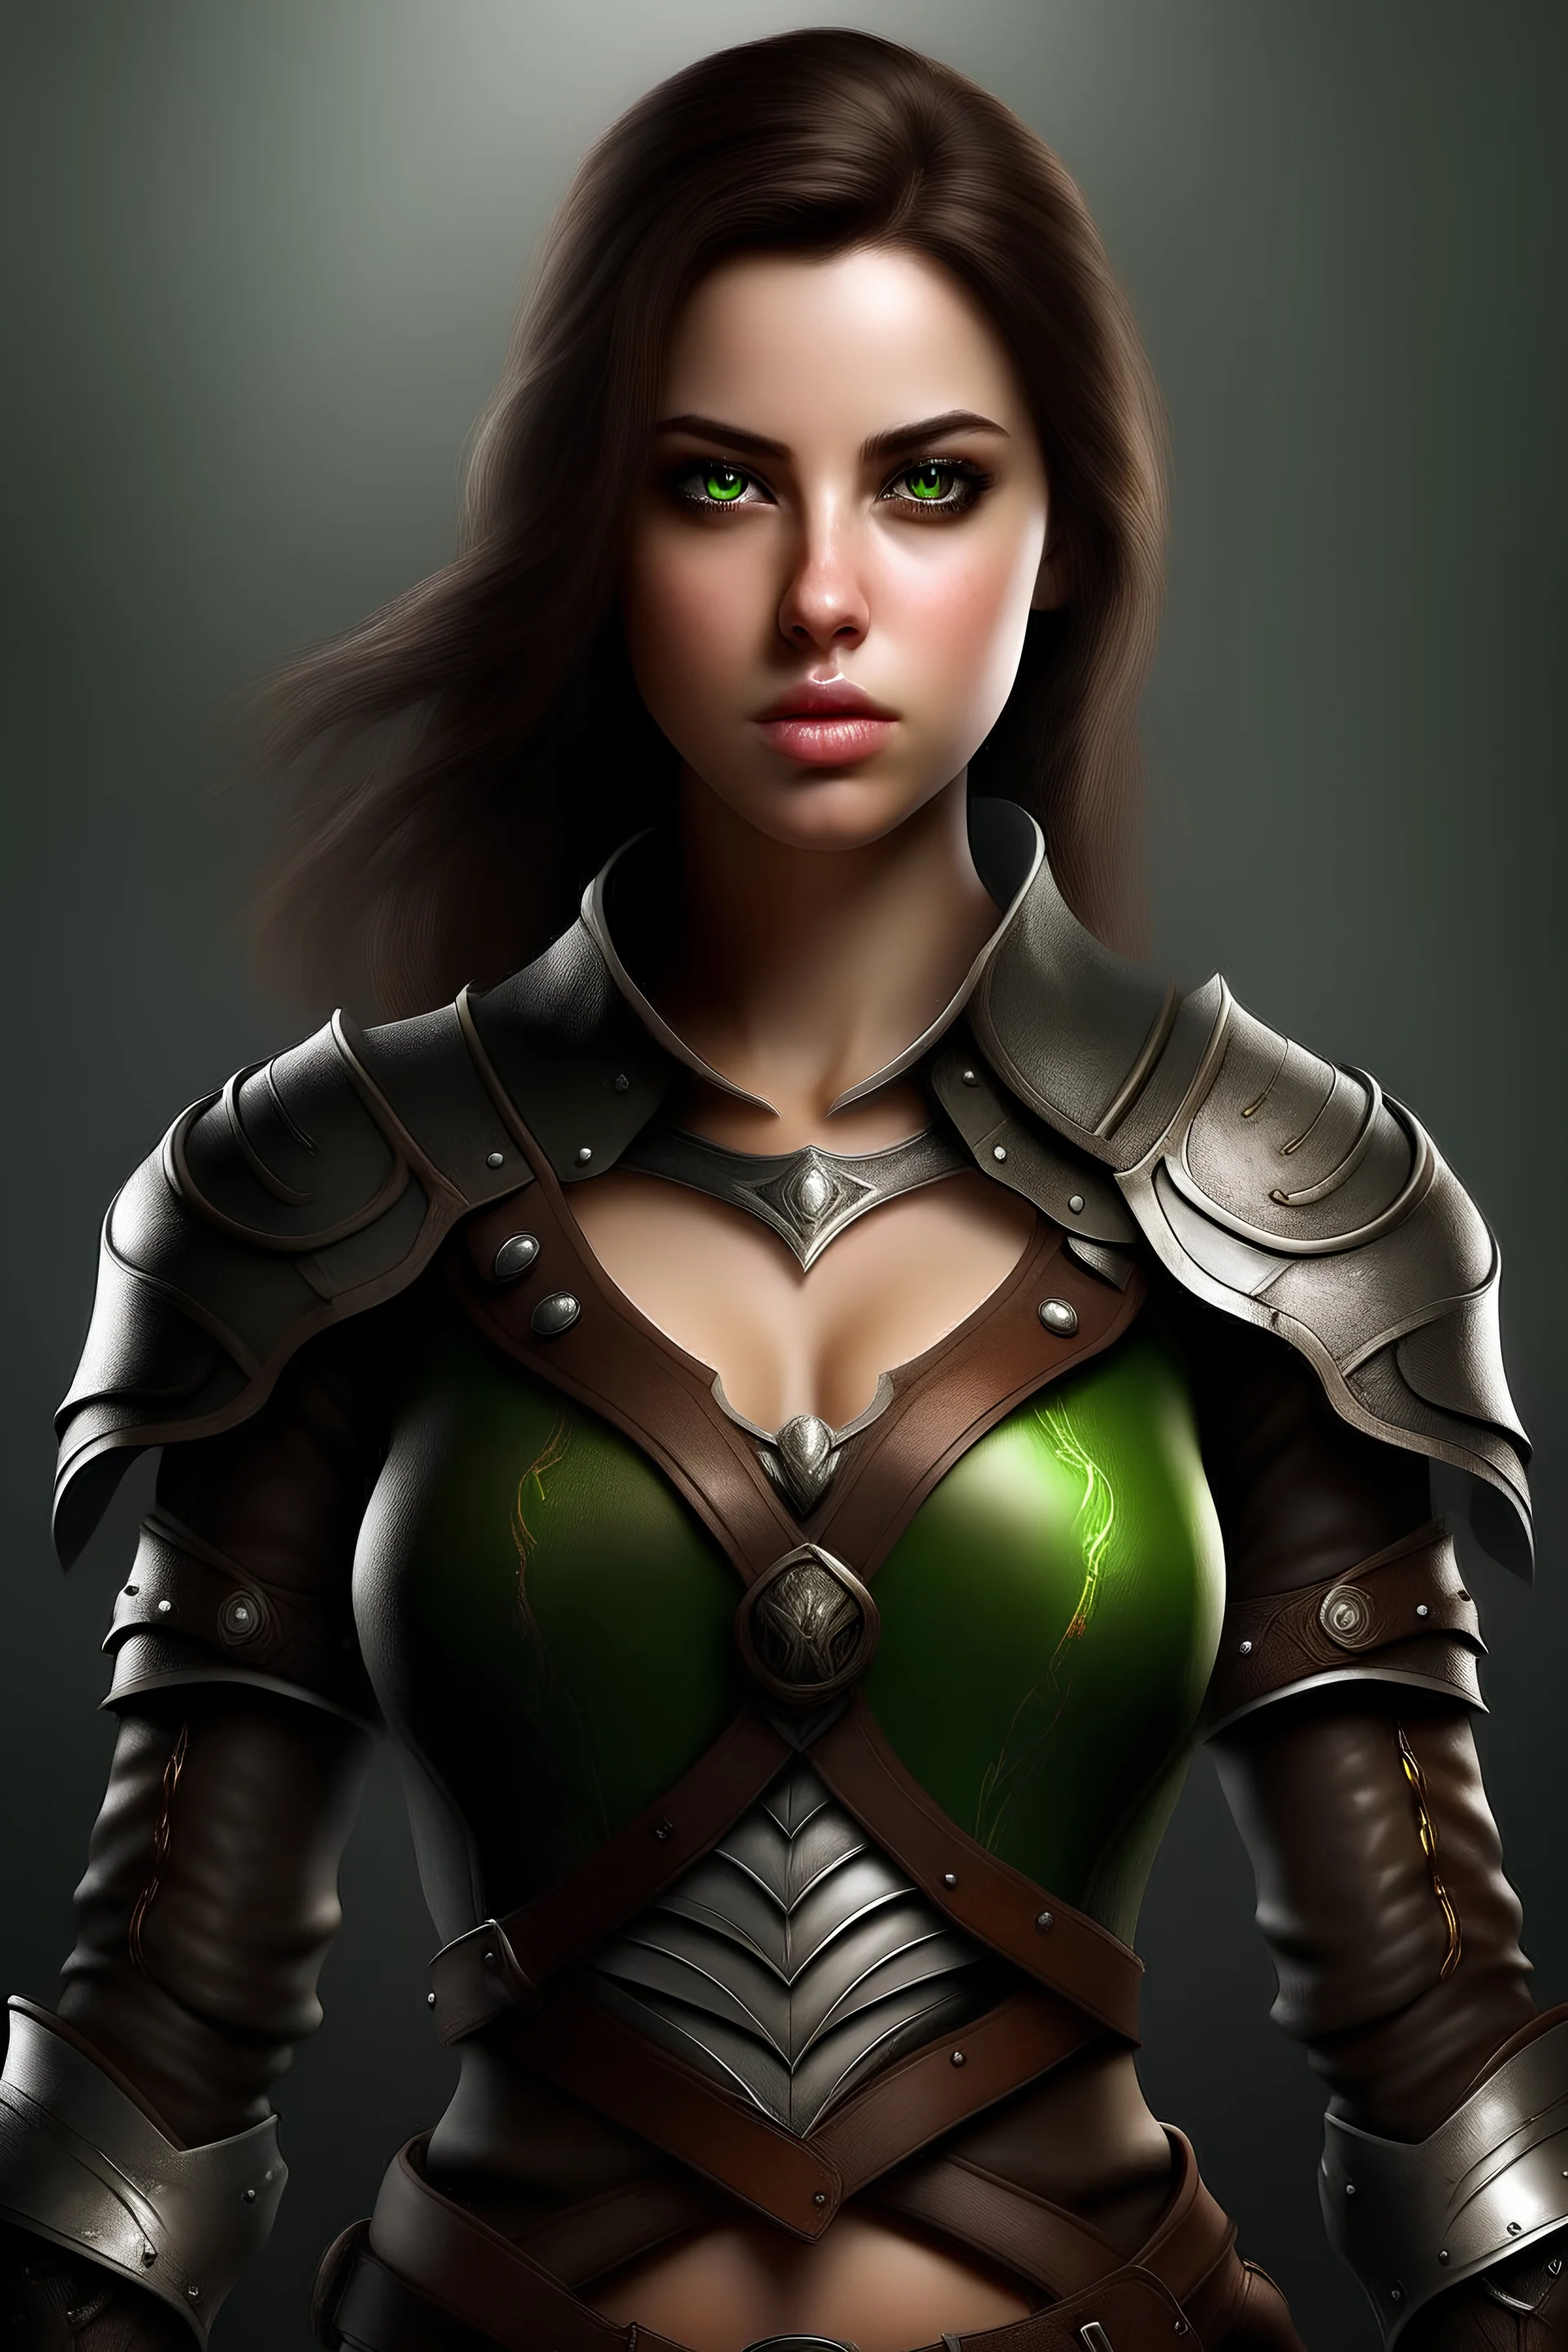 A full-body photorealistic portrait of a sexy 25-year-old female rogue. She has a beatiful face, brown hair that is very long, and green eyes. She is standing. Ultra wide full-body shot focused on the face. Fantasy setting. She wears leather armor.